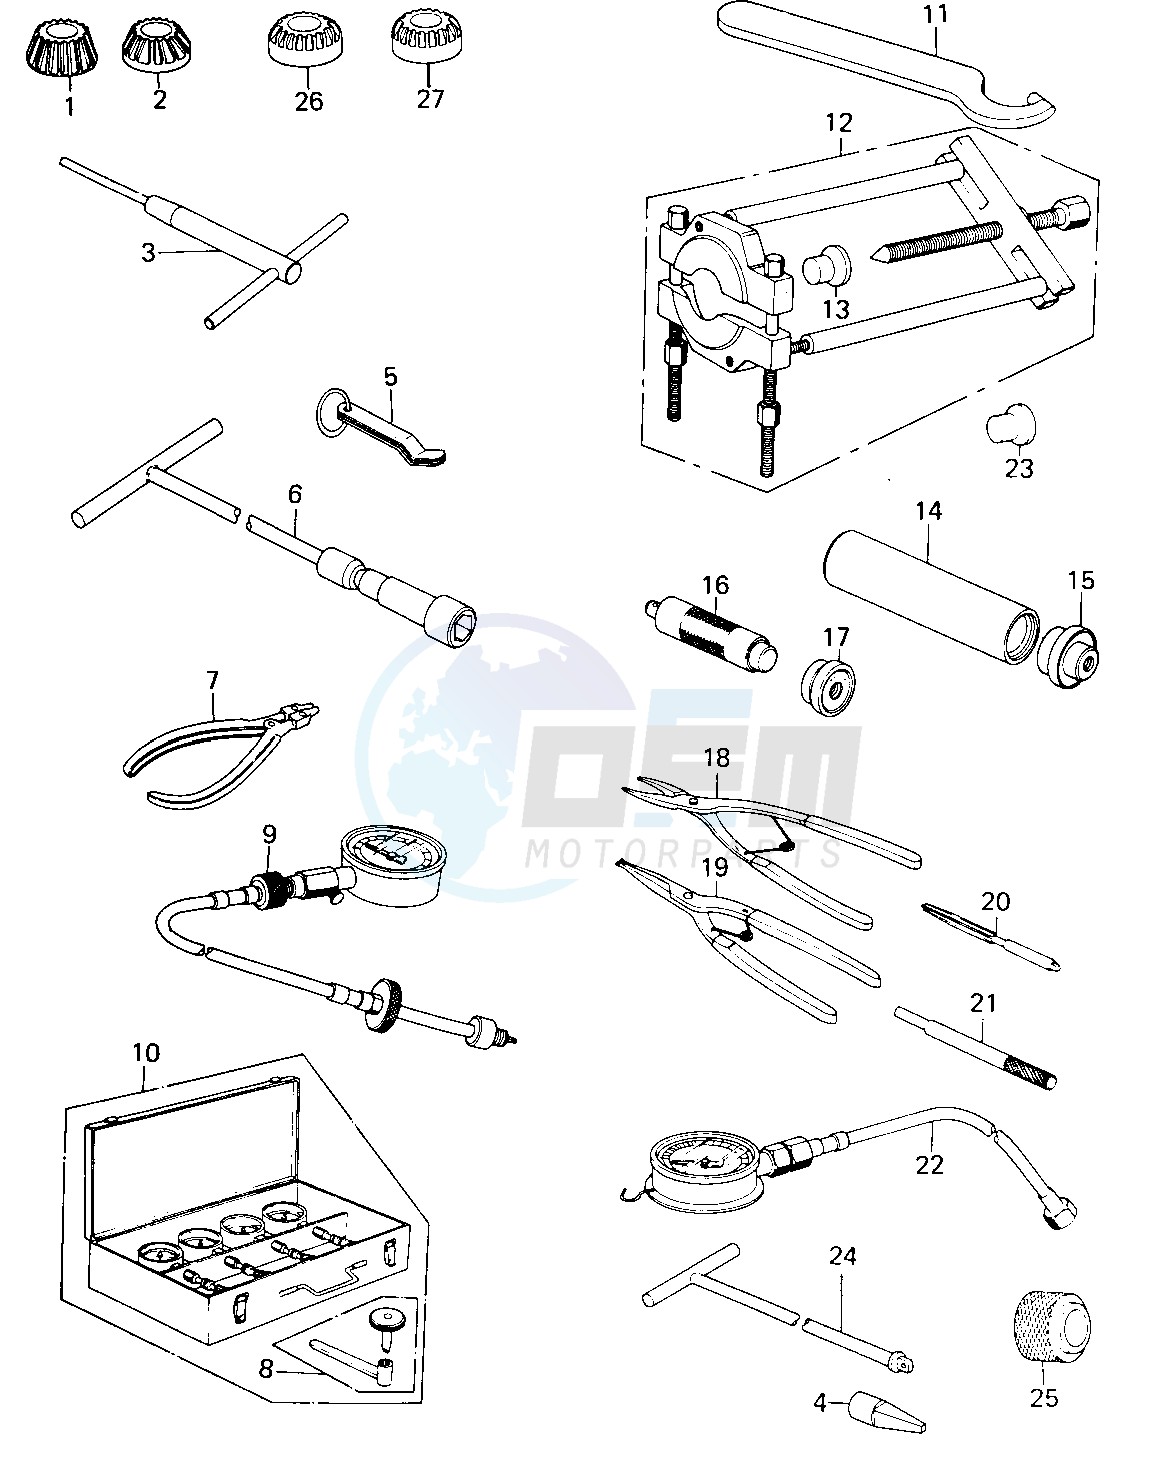 SPECIAL SERVICE TOOLS "A" image